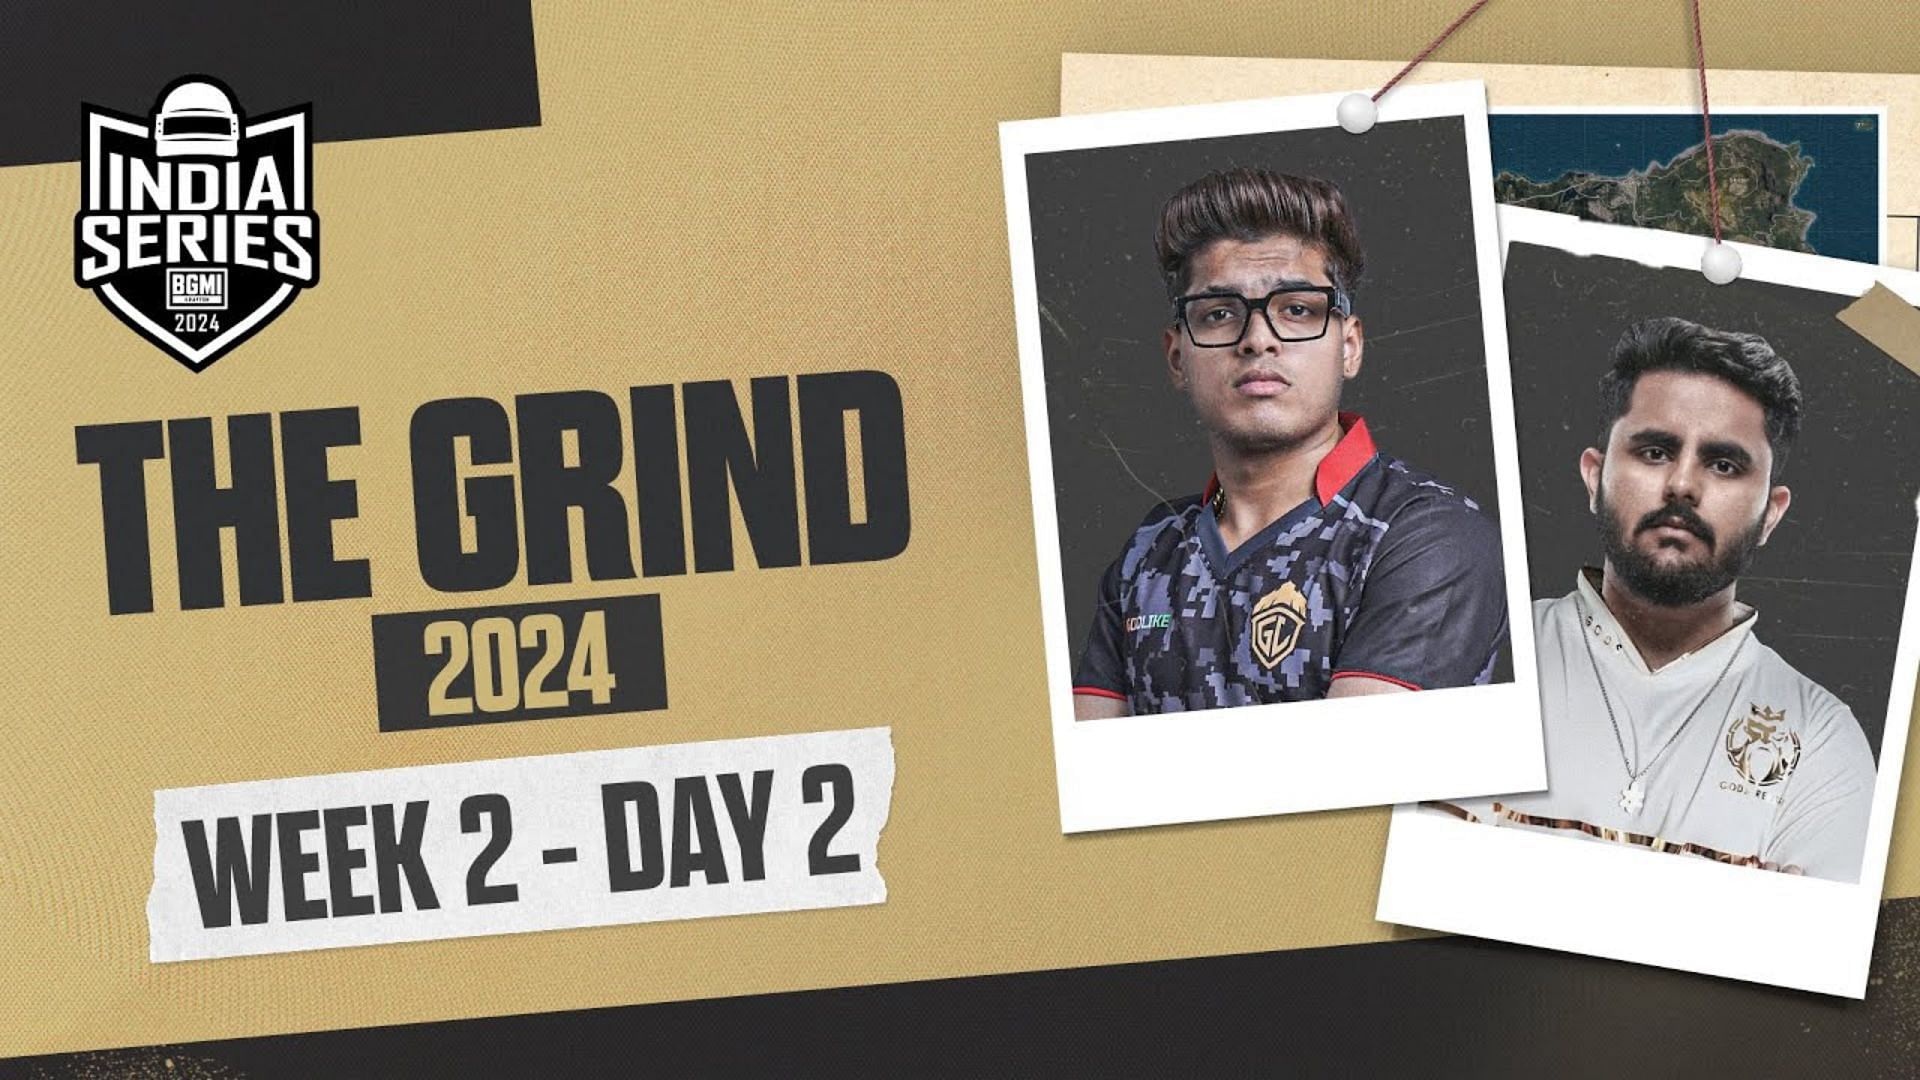 Day 2 of BGiS The Grind Week 2 takes place on April 13 (Image via BGMI)